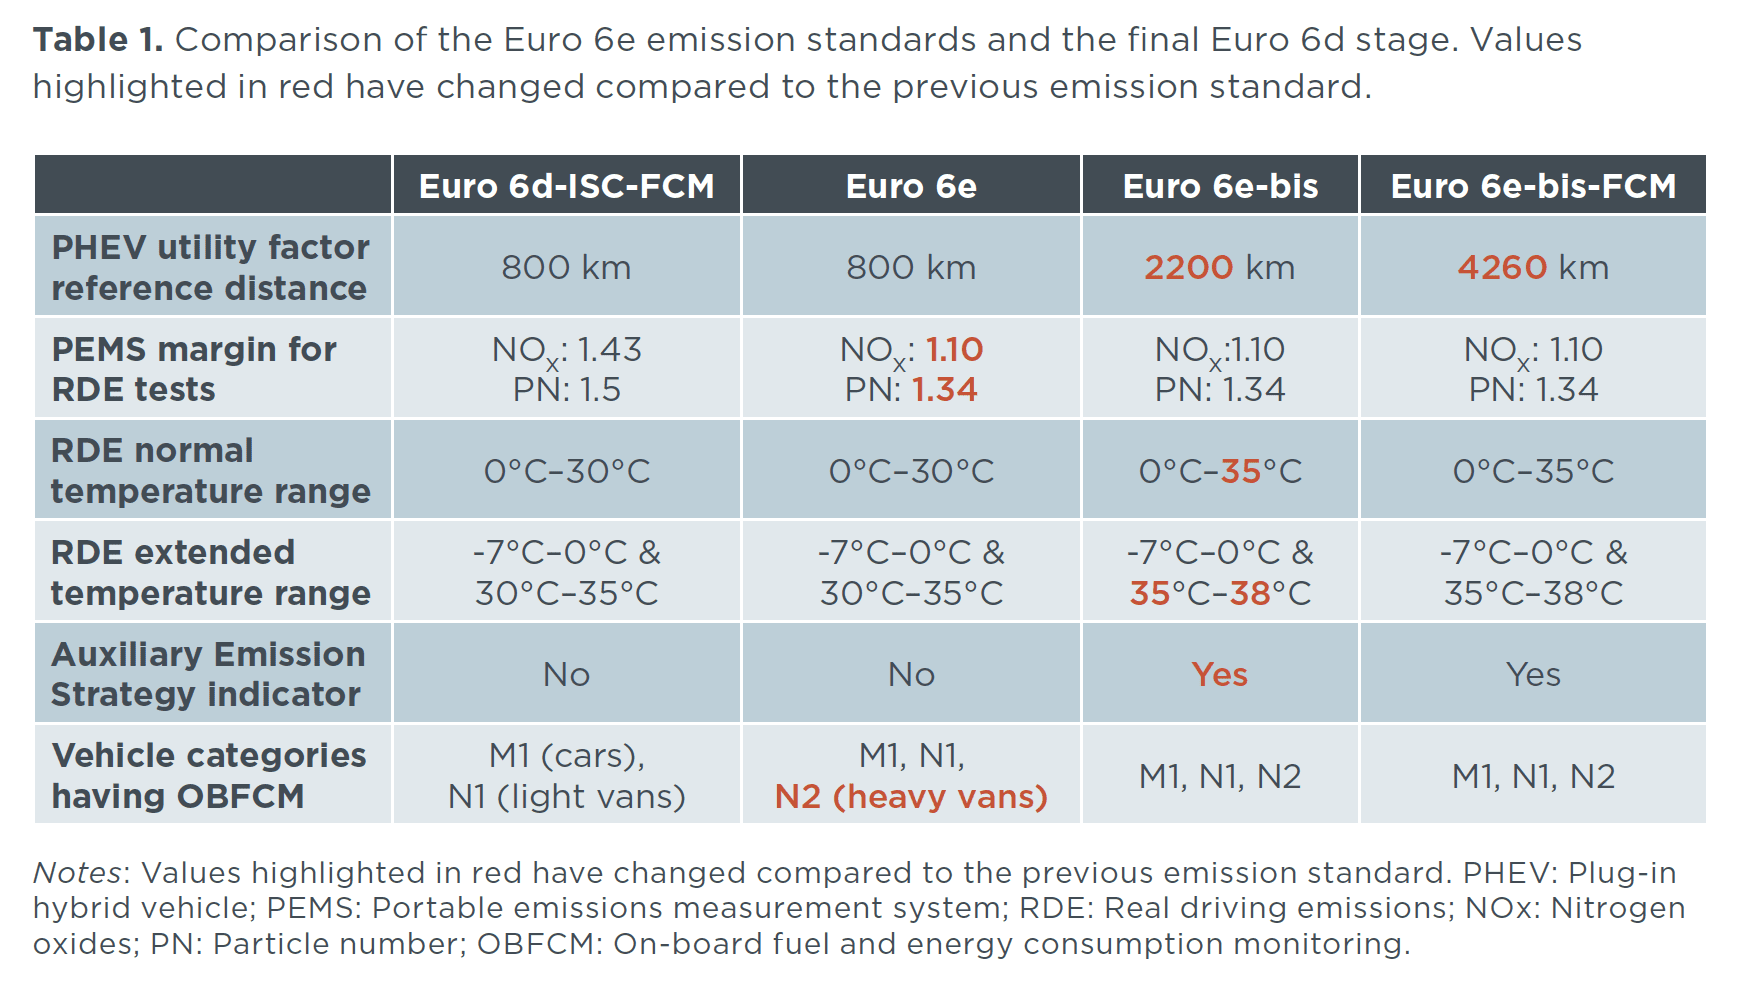 Table showing changes introduced by Euro 6e standards